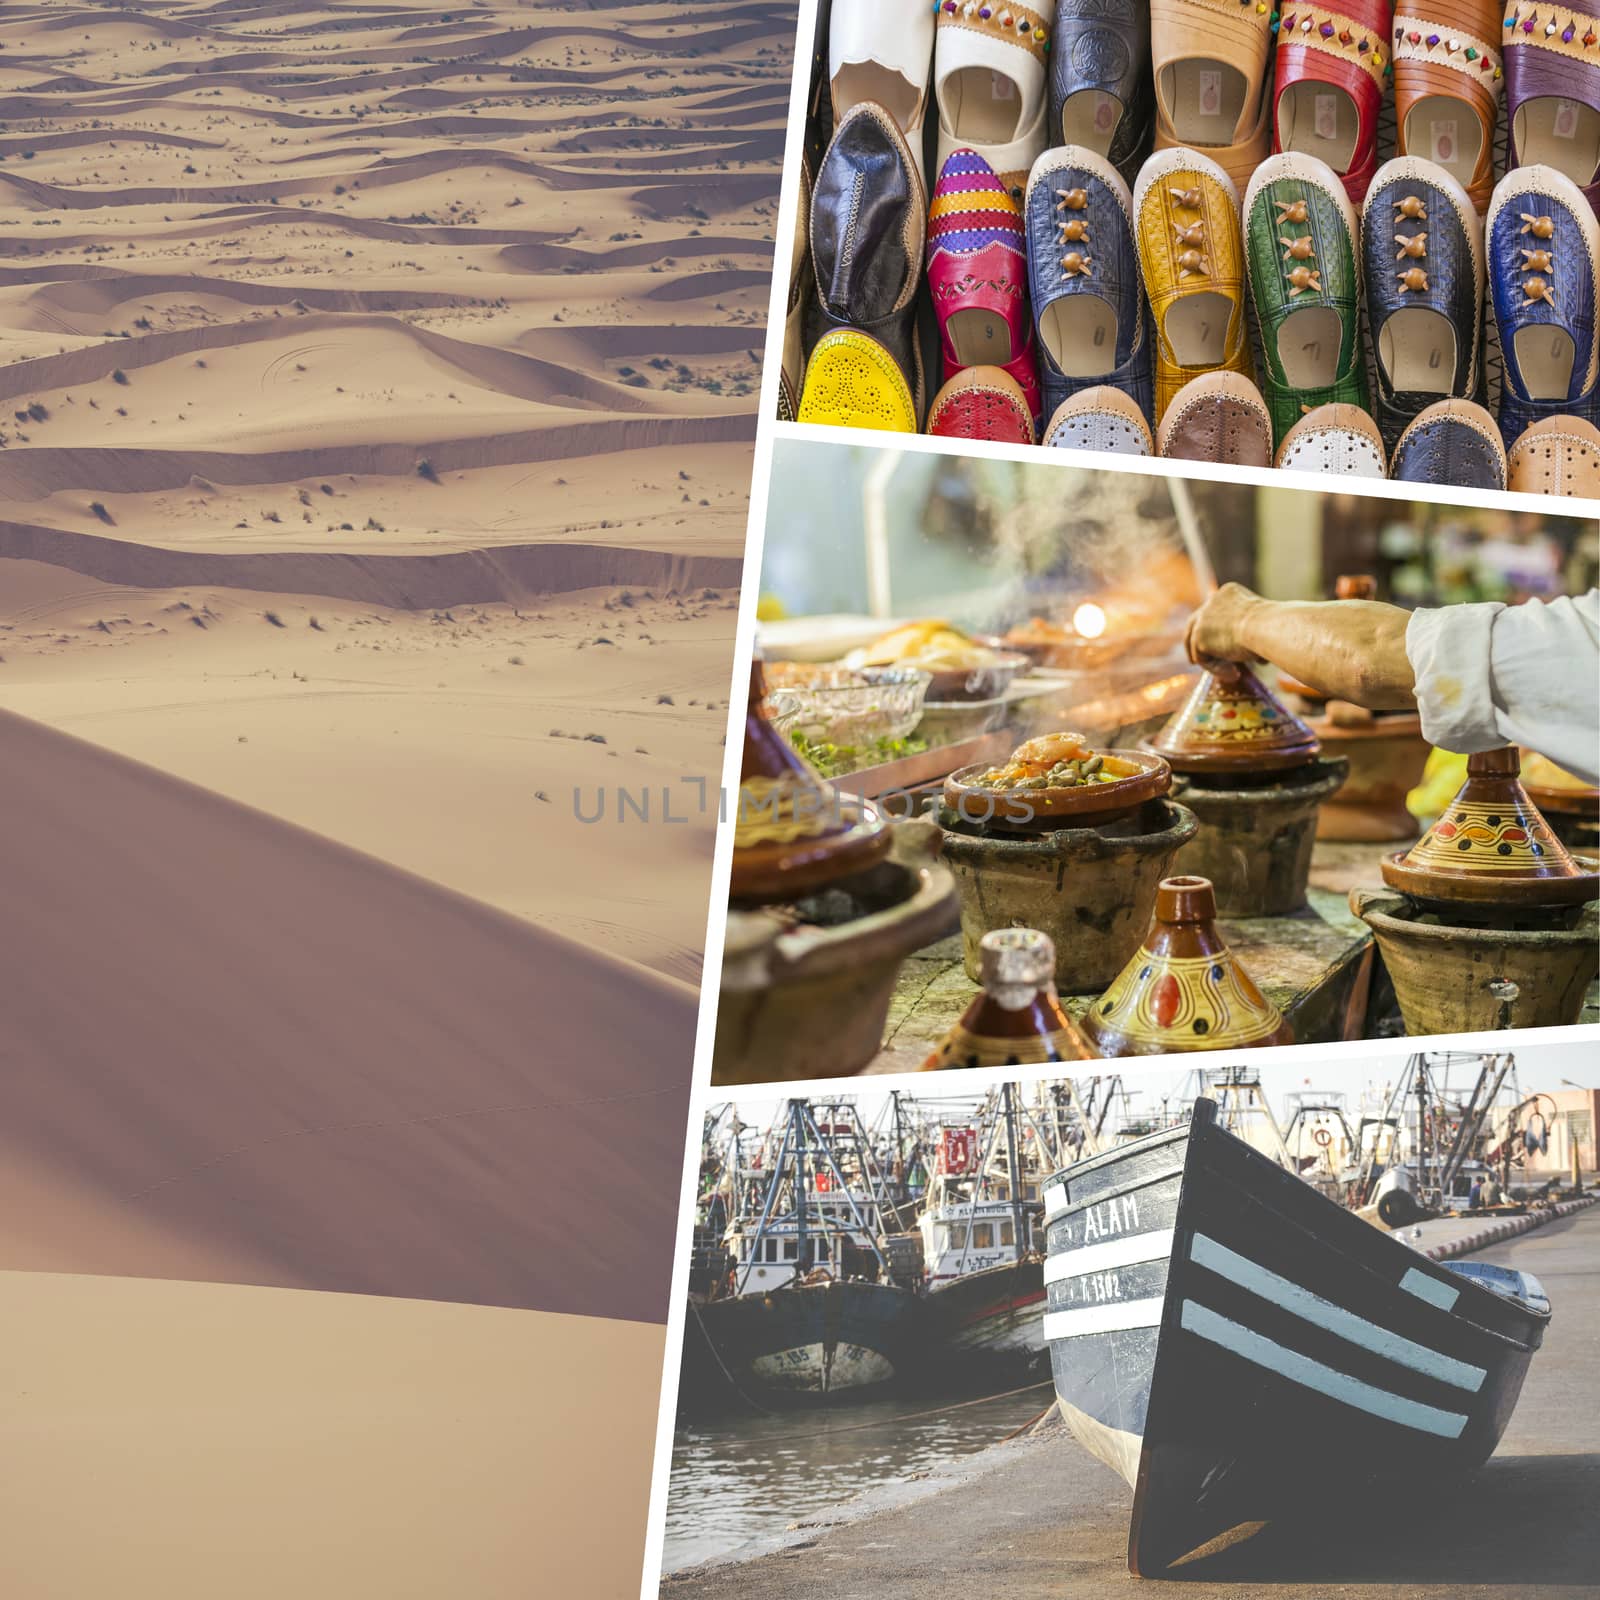 Collage of typical places in Morocco - my photos